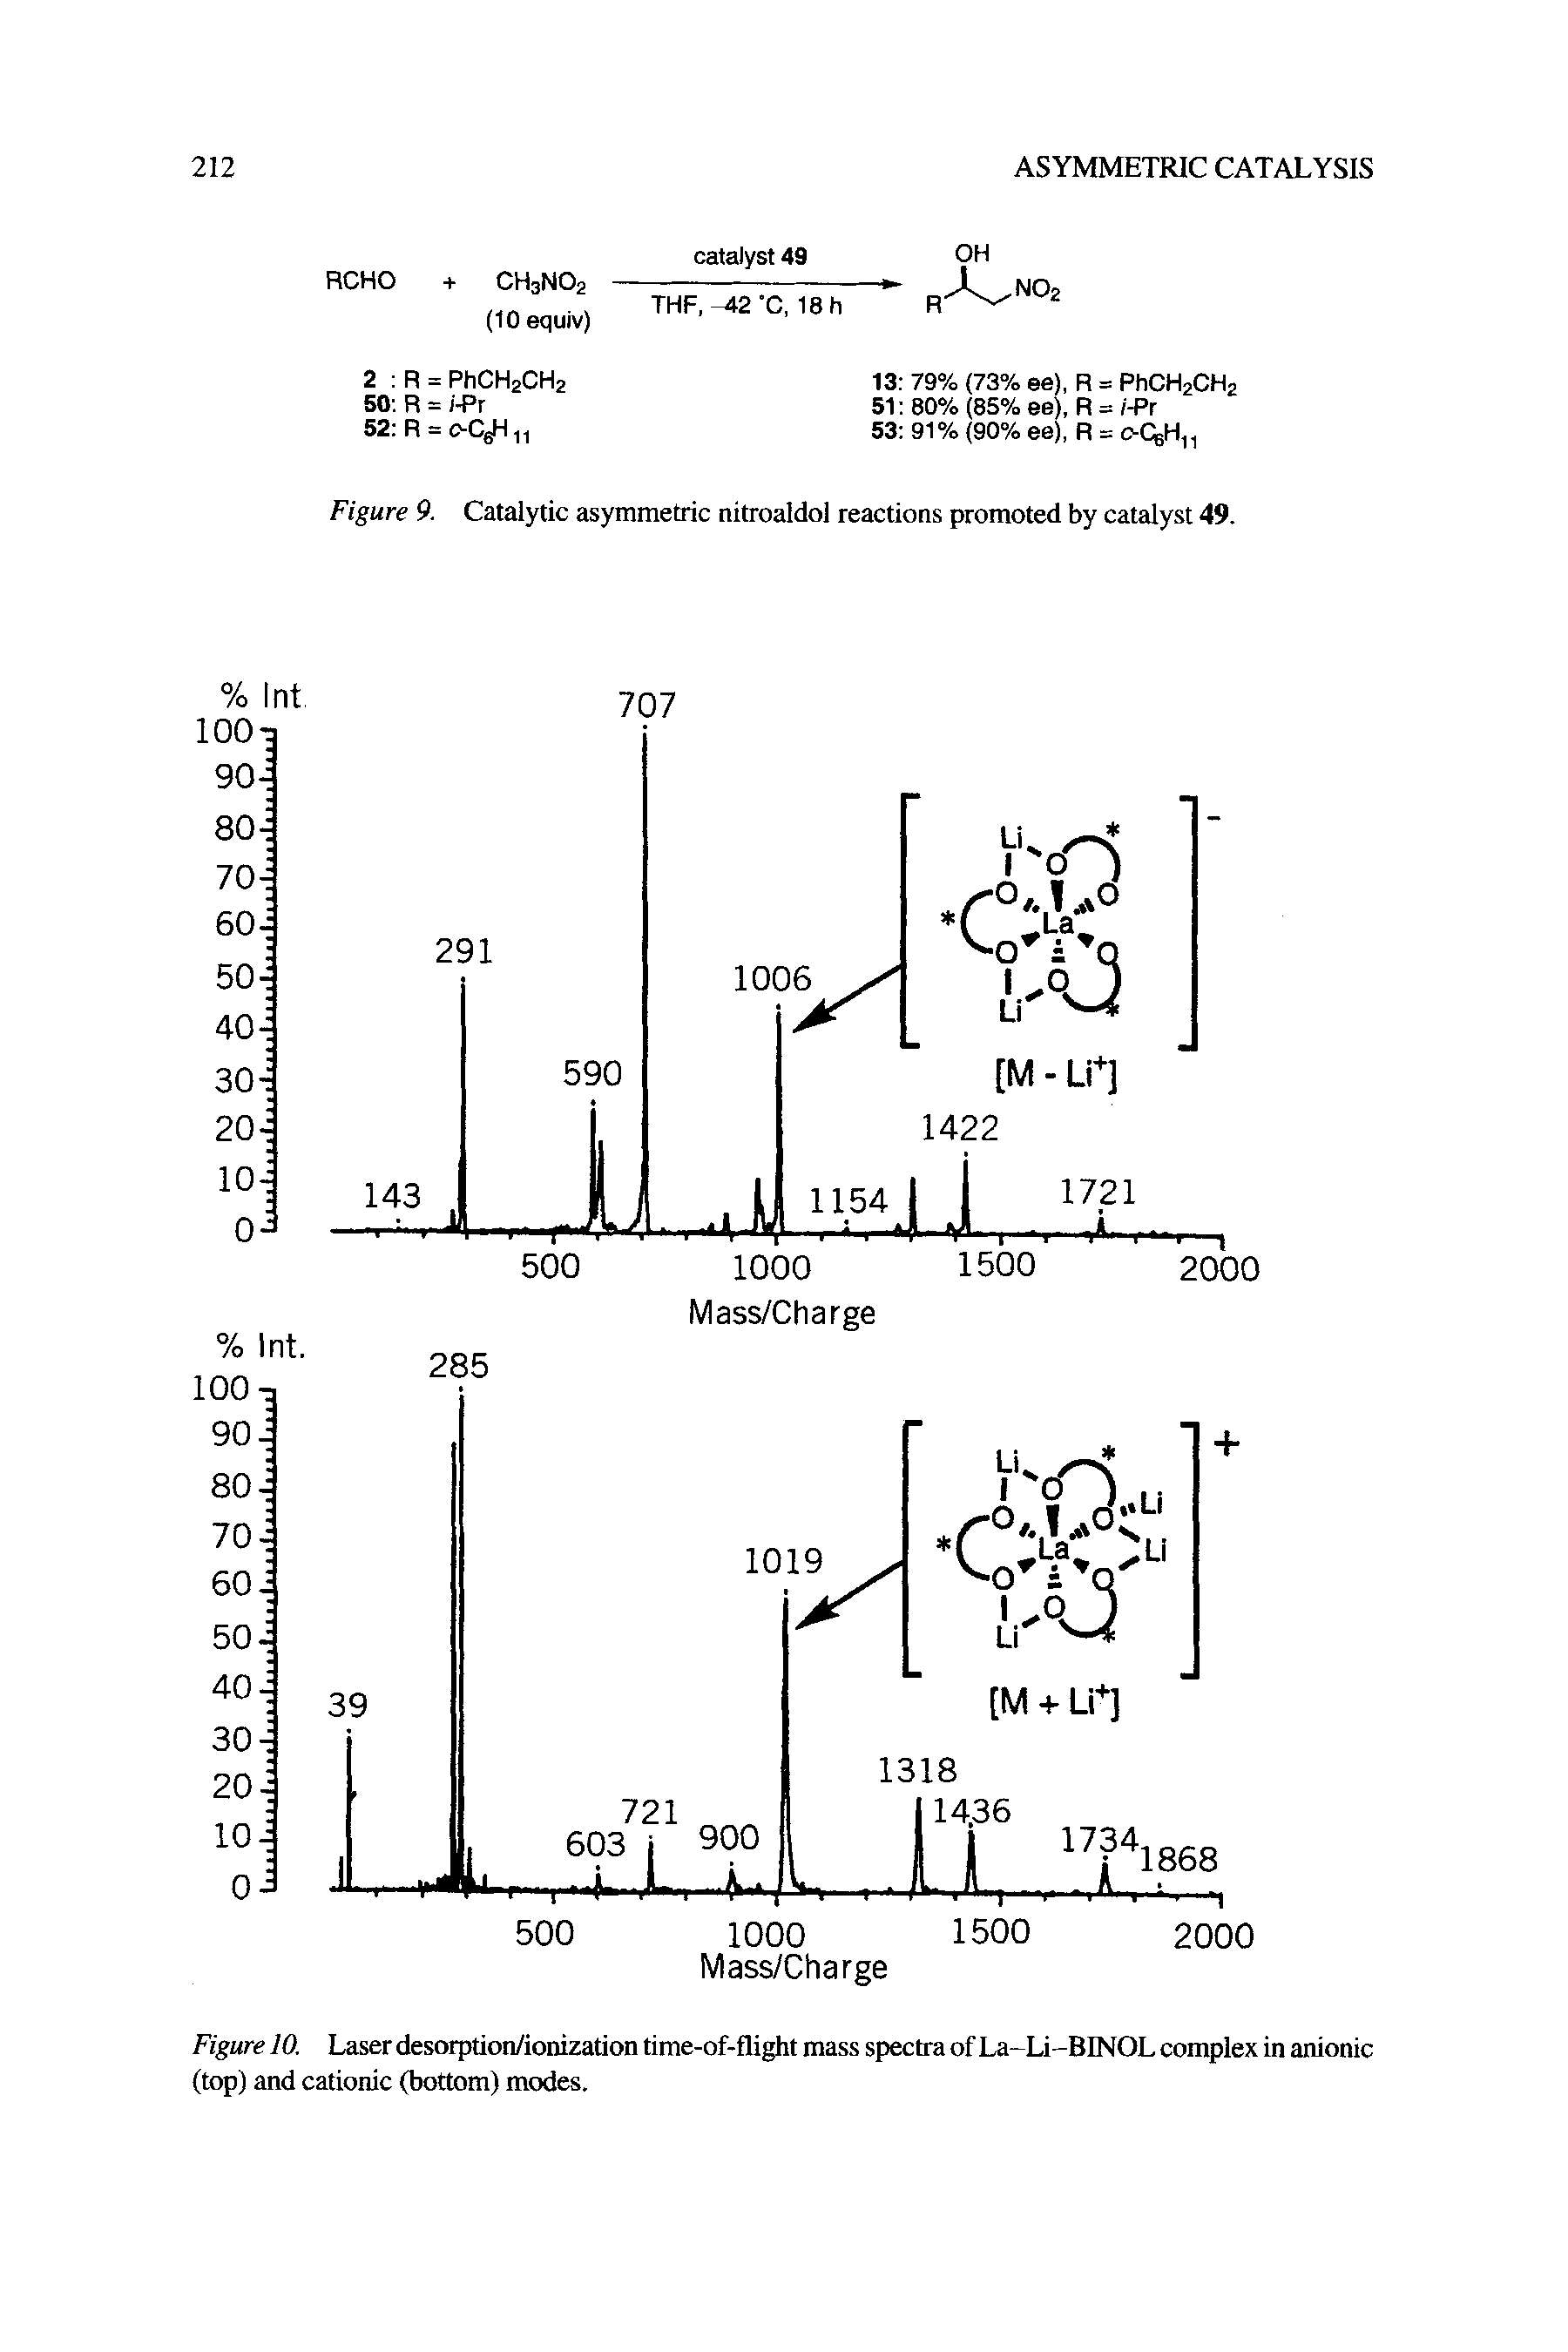 Figure 9. Catalytic asymmetric nitroaldol reactions promoted by catalyst 49.